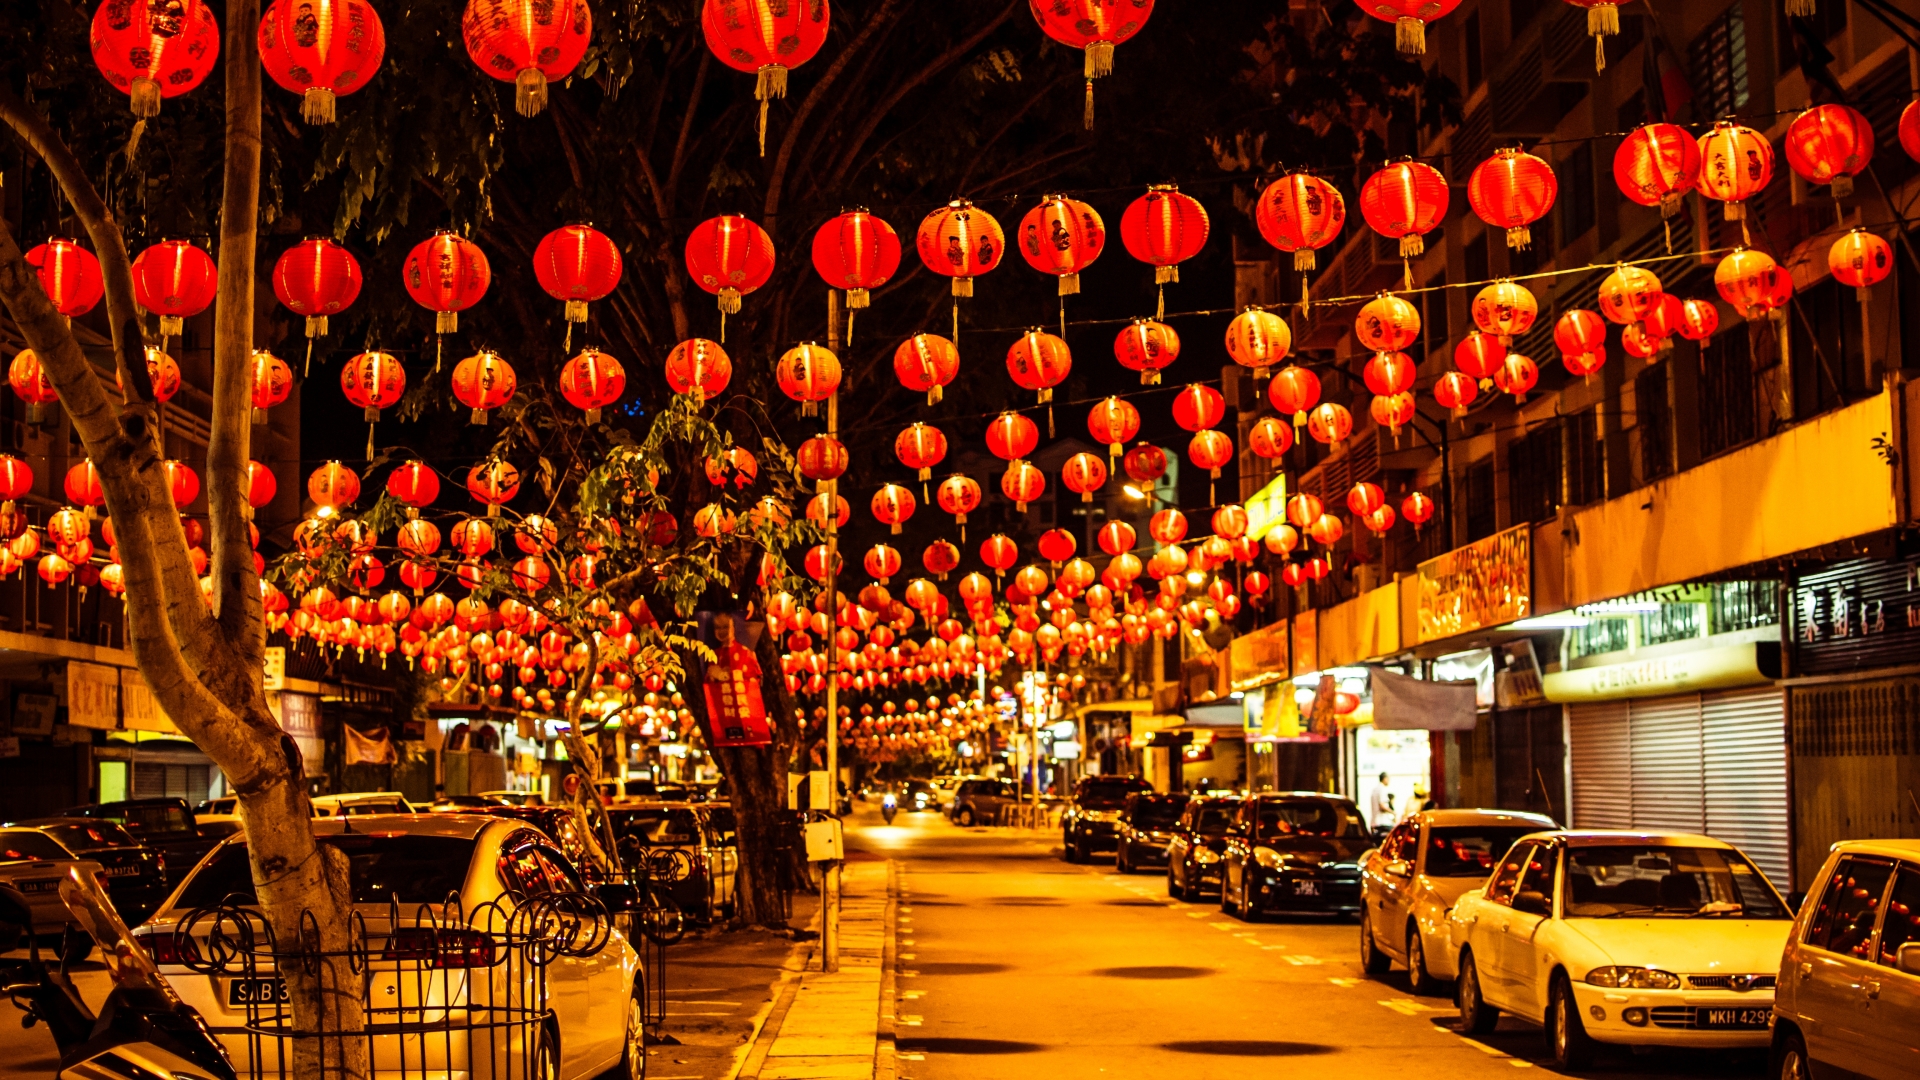 Chinese New Year Streets - HD Wallpaper 